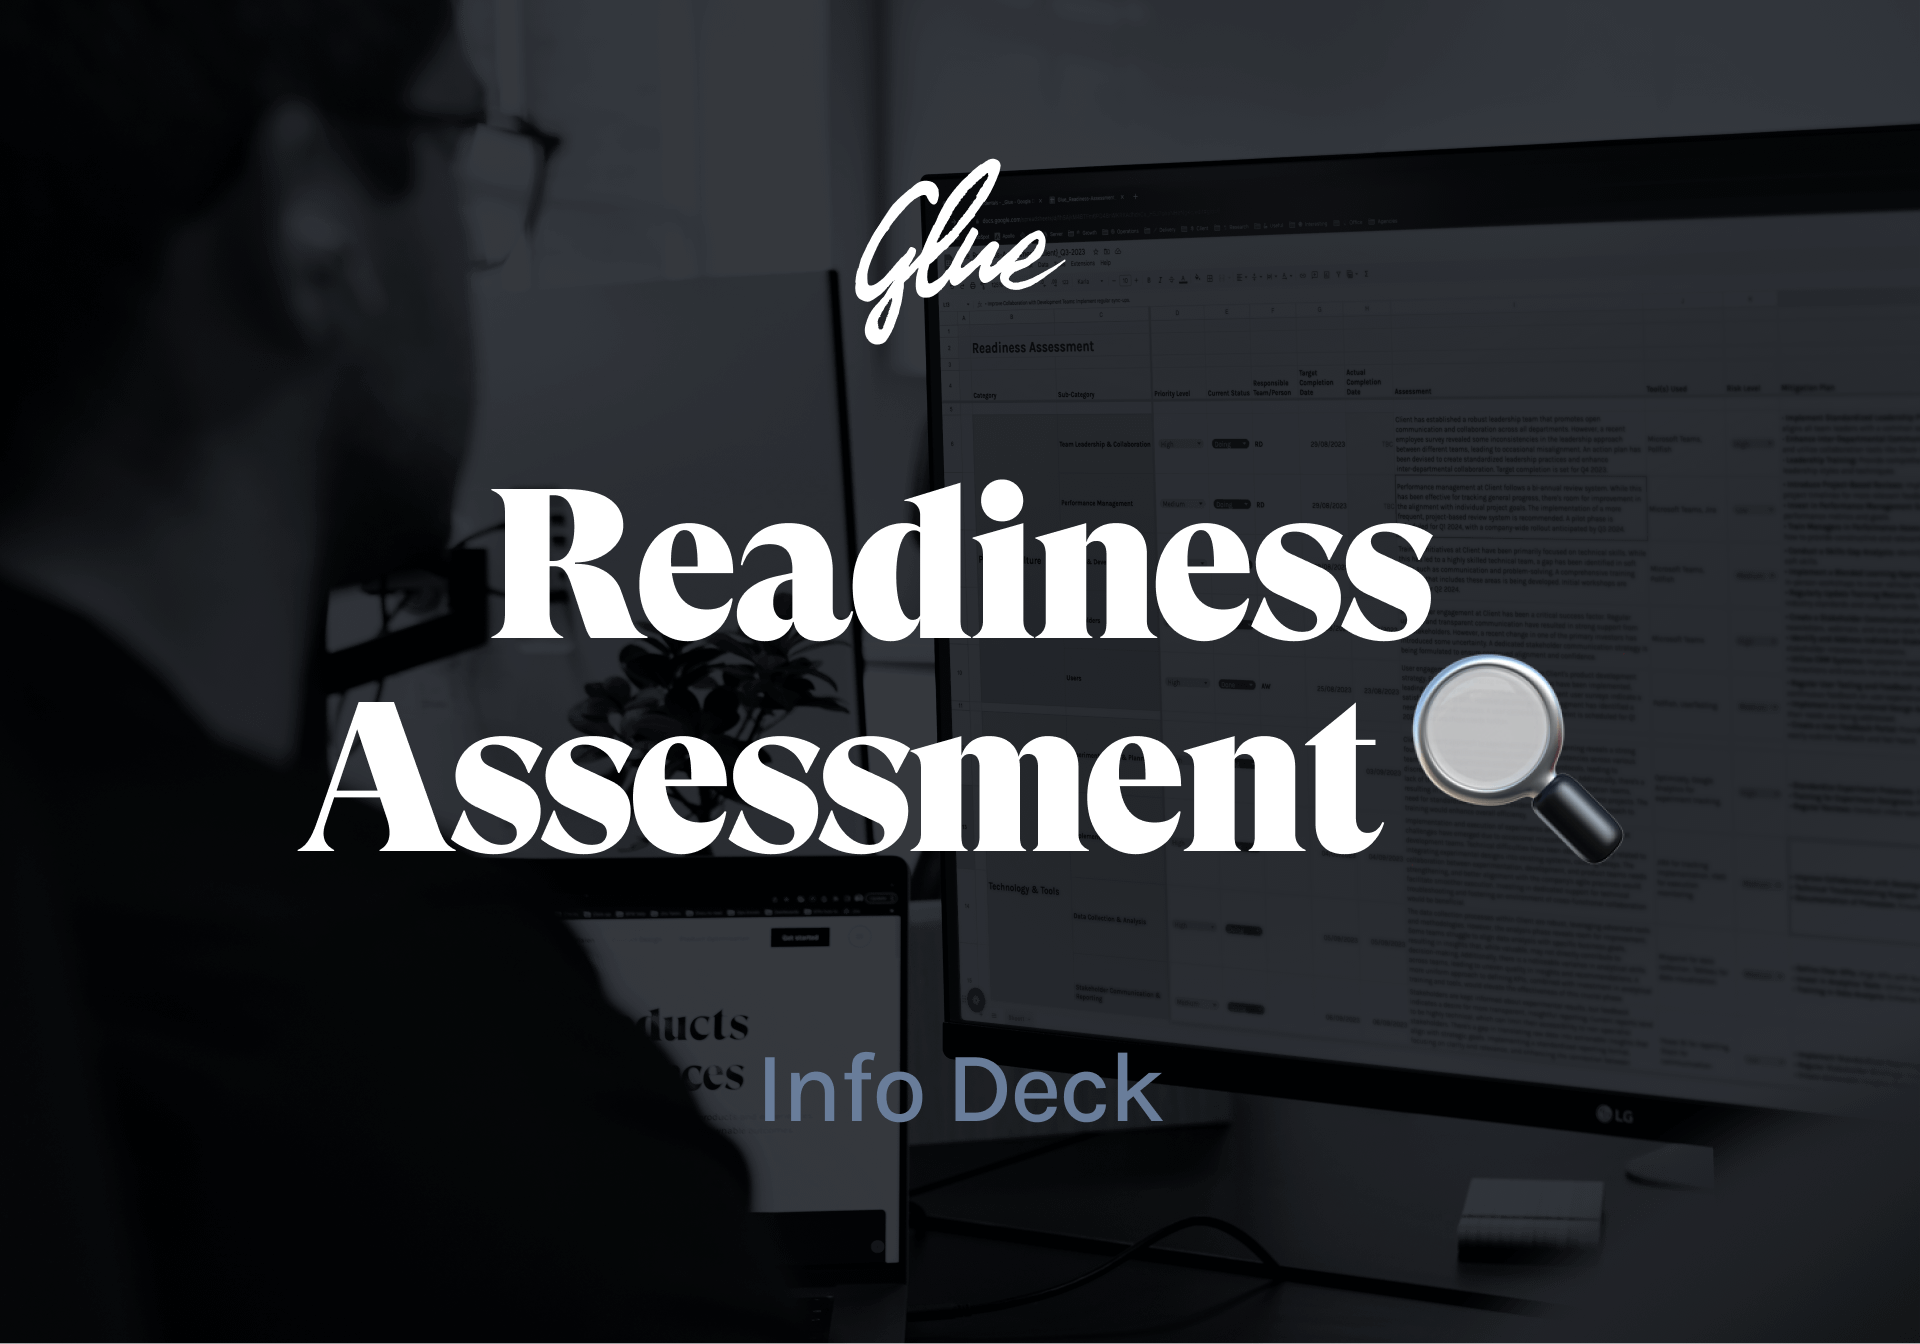 Glue Readiness assessment info-deck cover